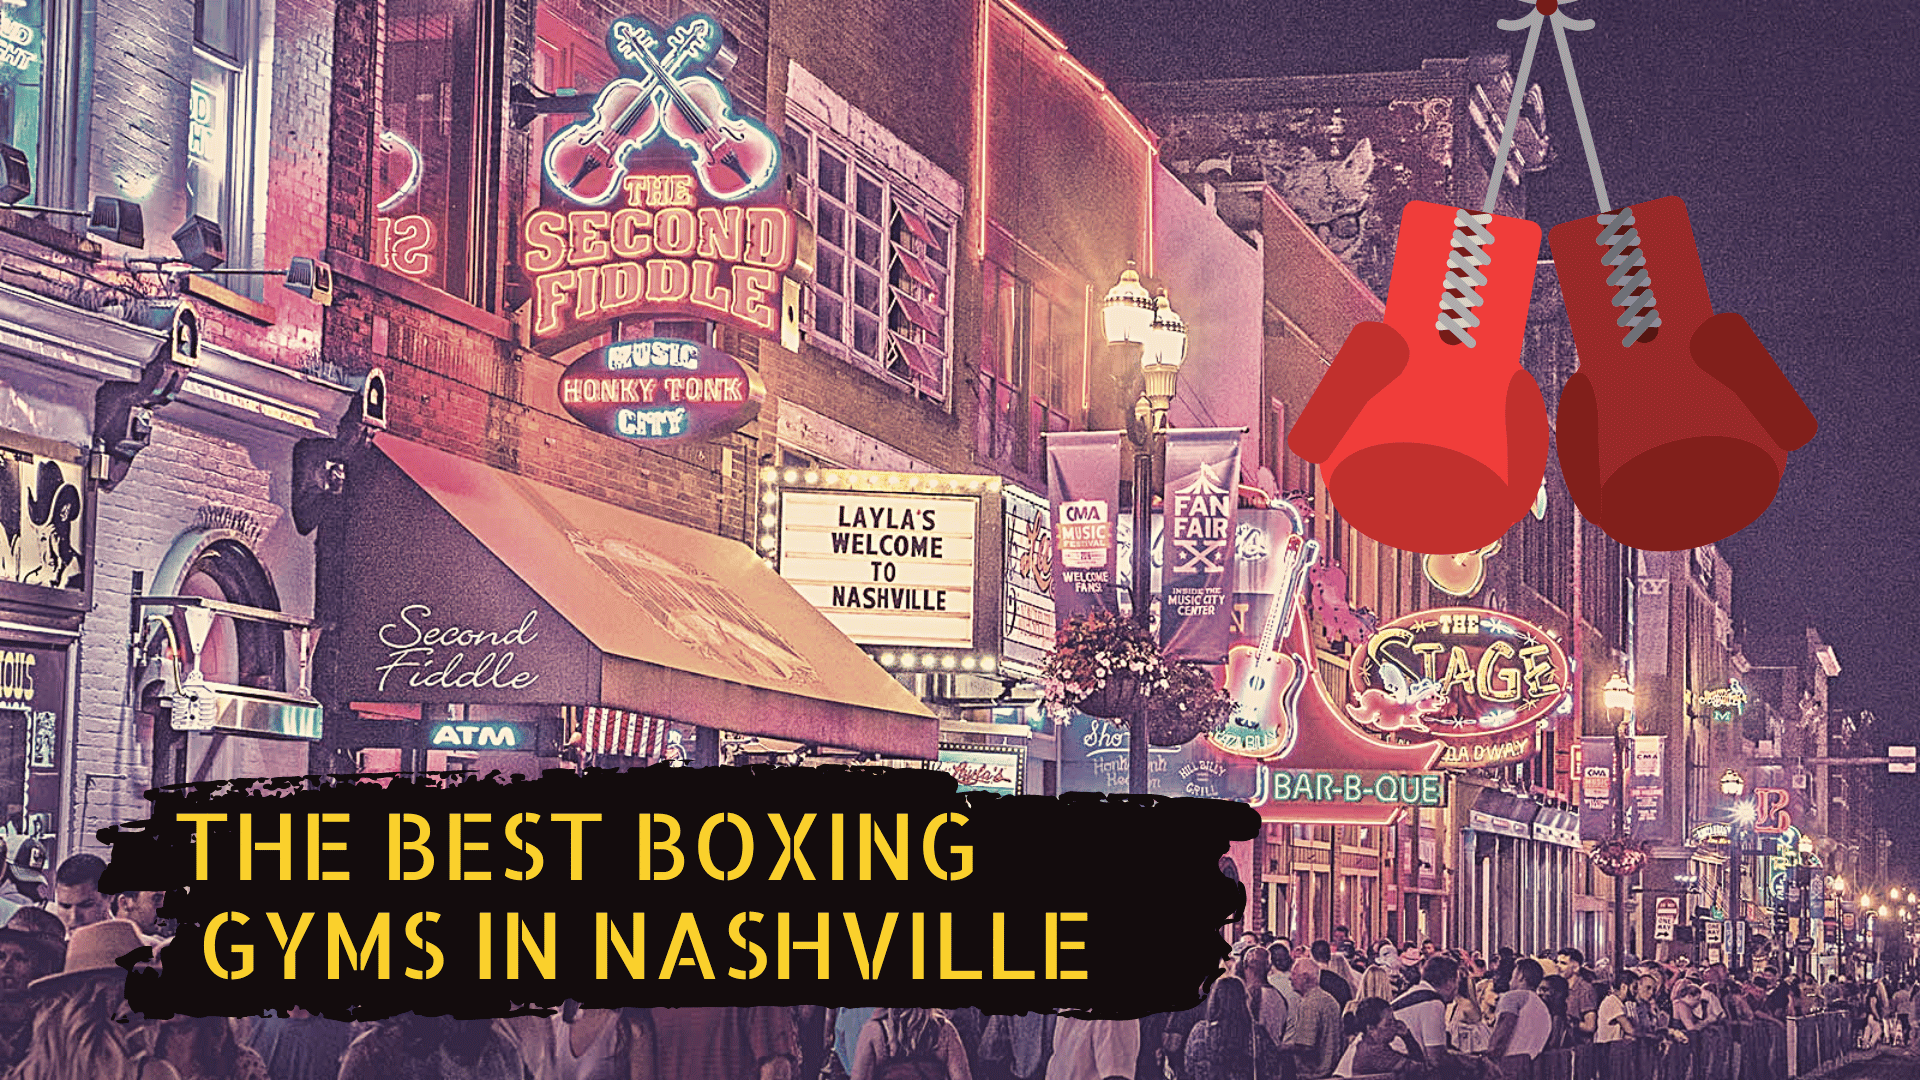 A picture of broadway street in nashville with some boxing gloves and the title "best boxing gyms in nashville"